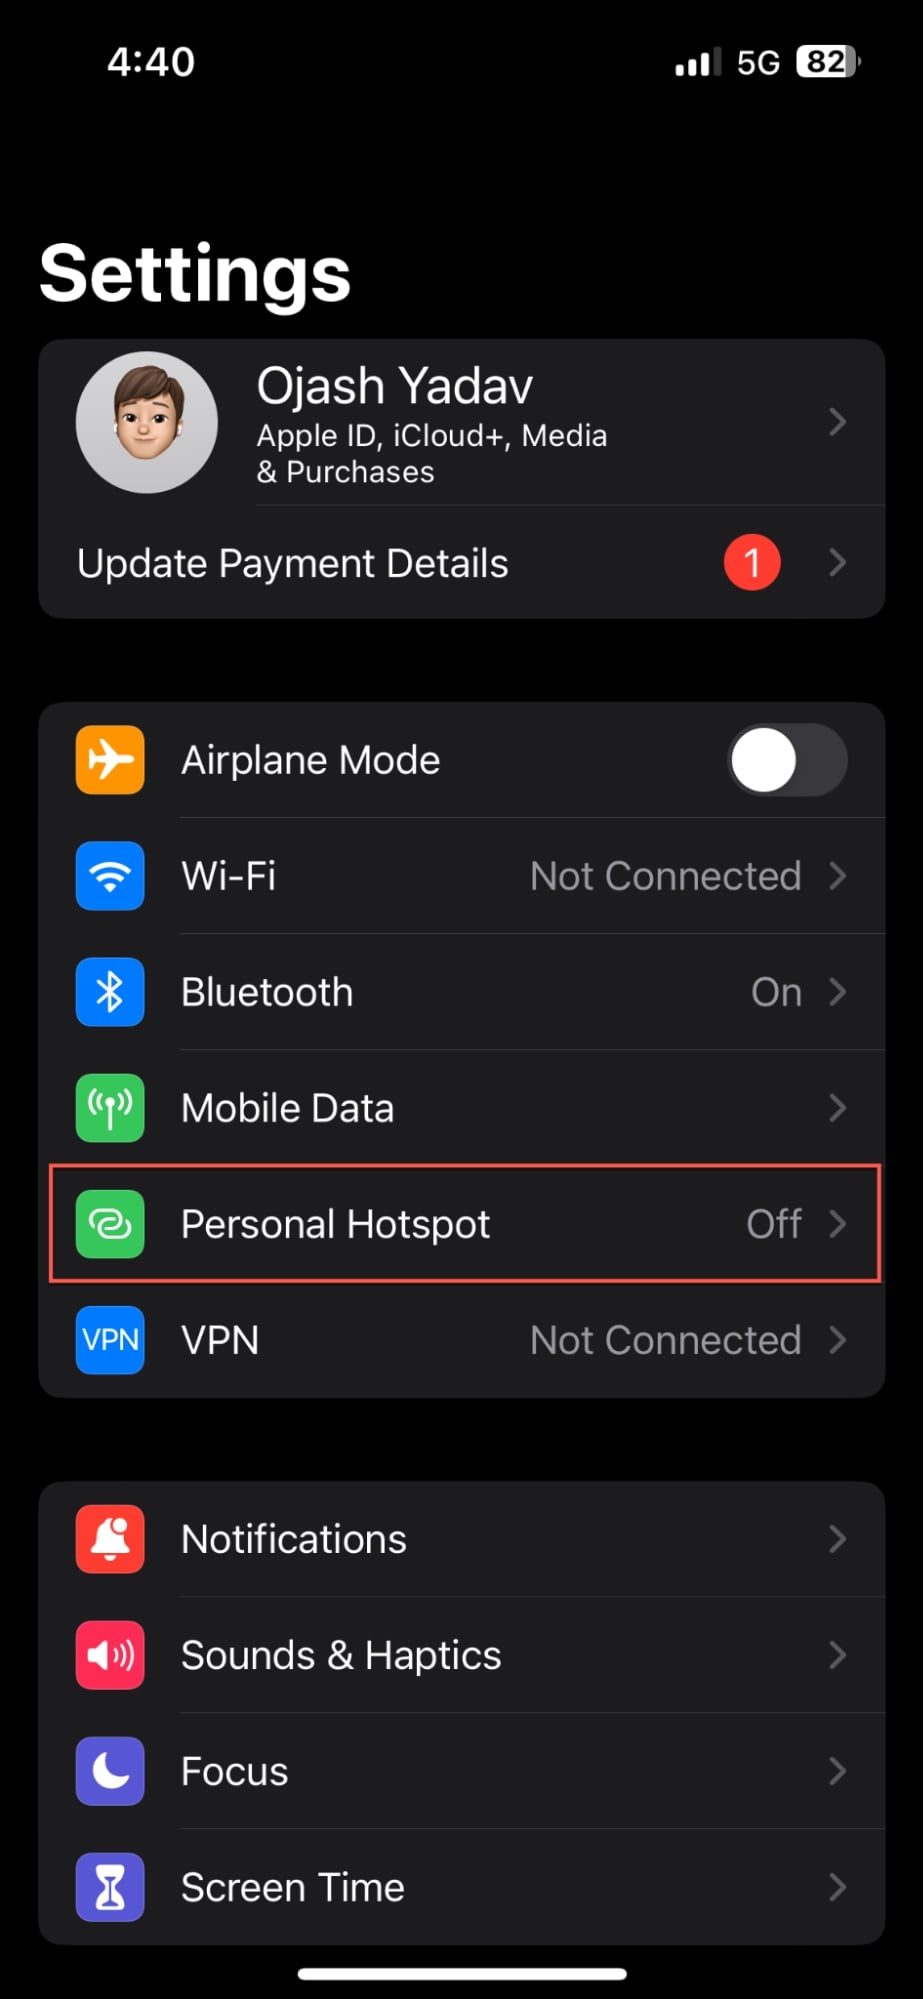 Personal Hotspot on your iPhone